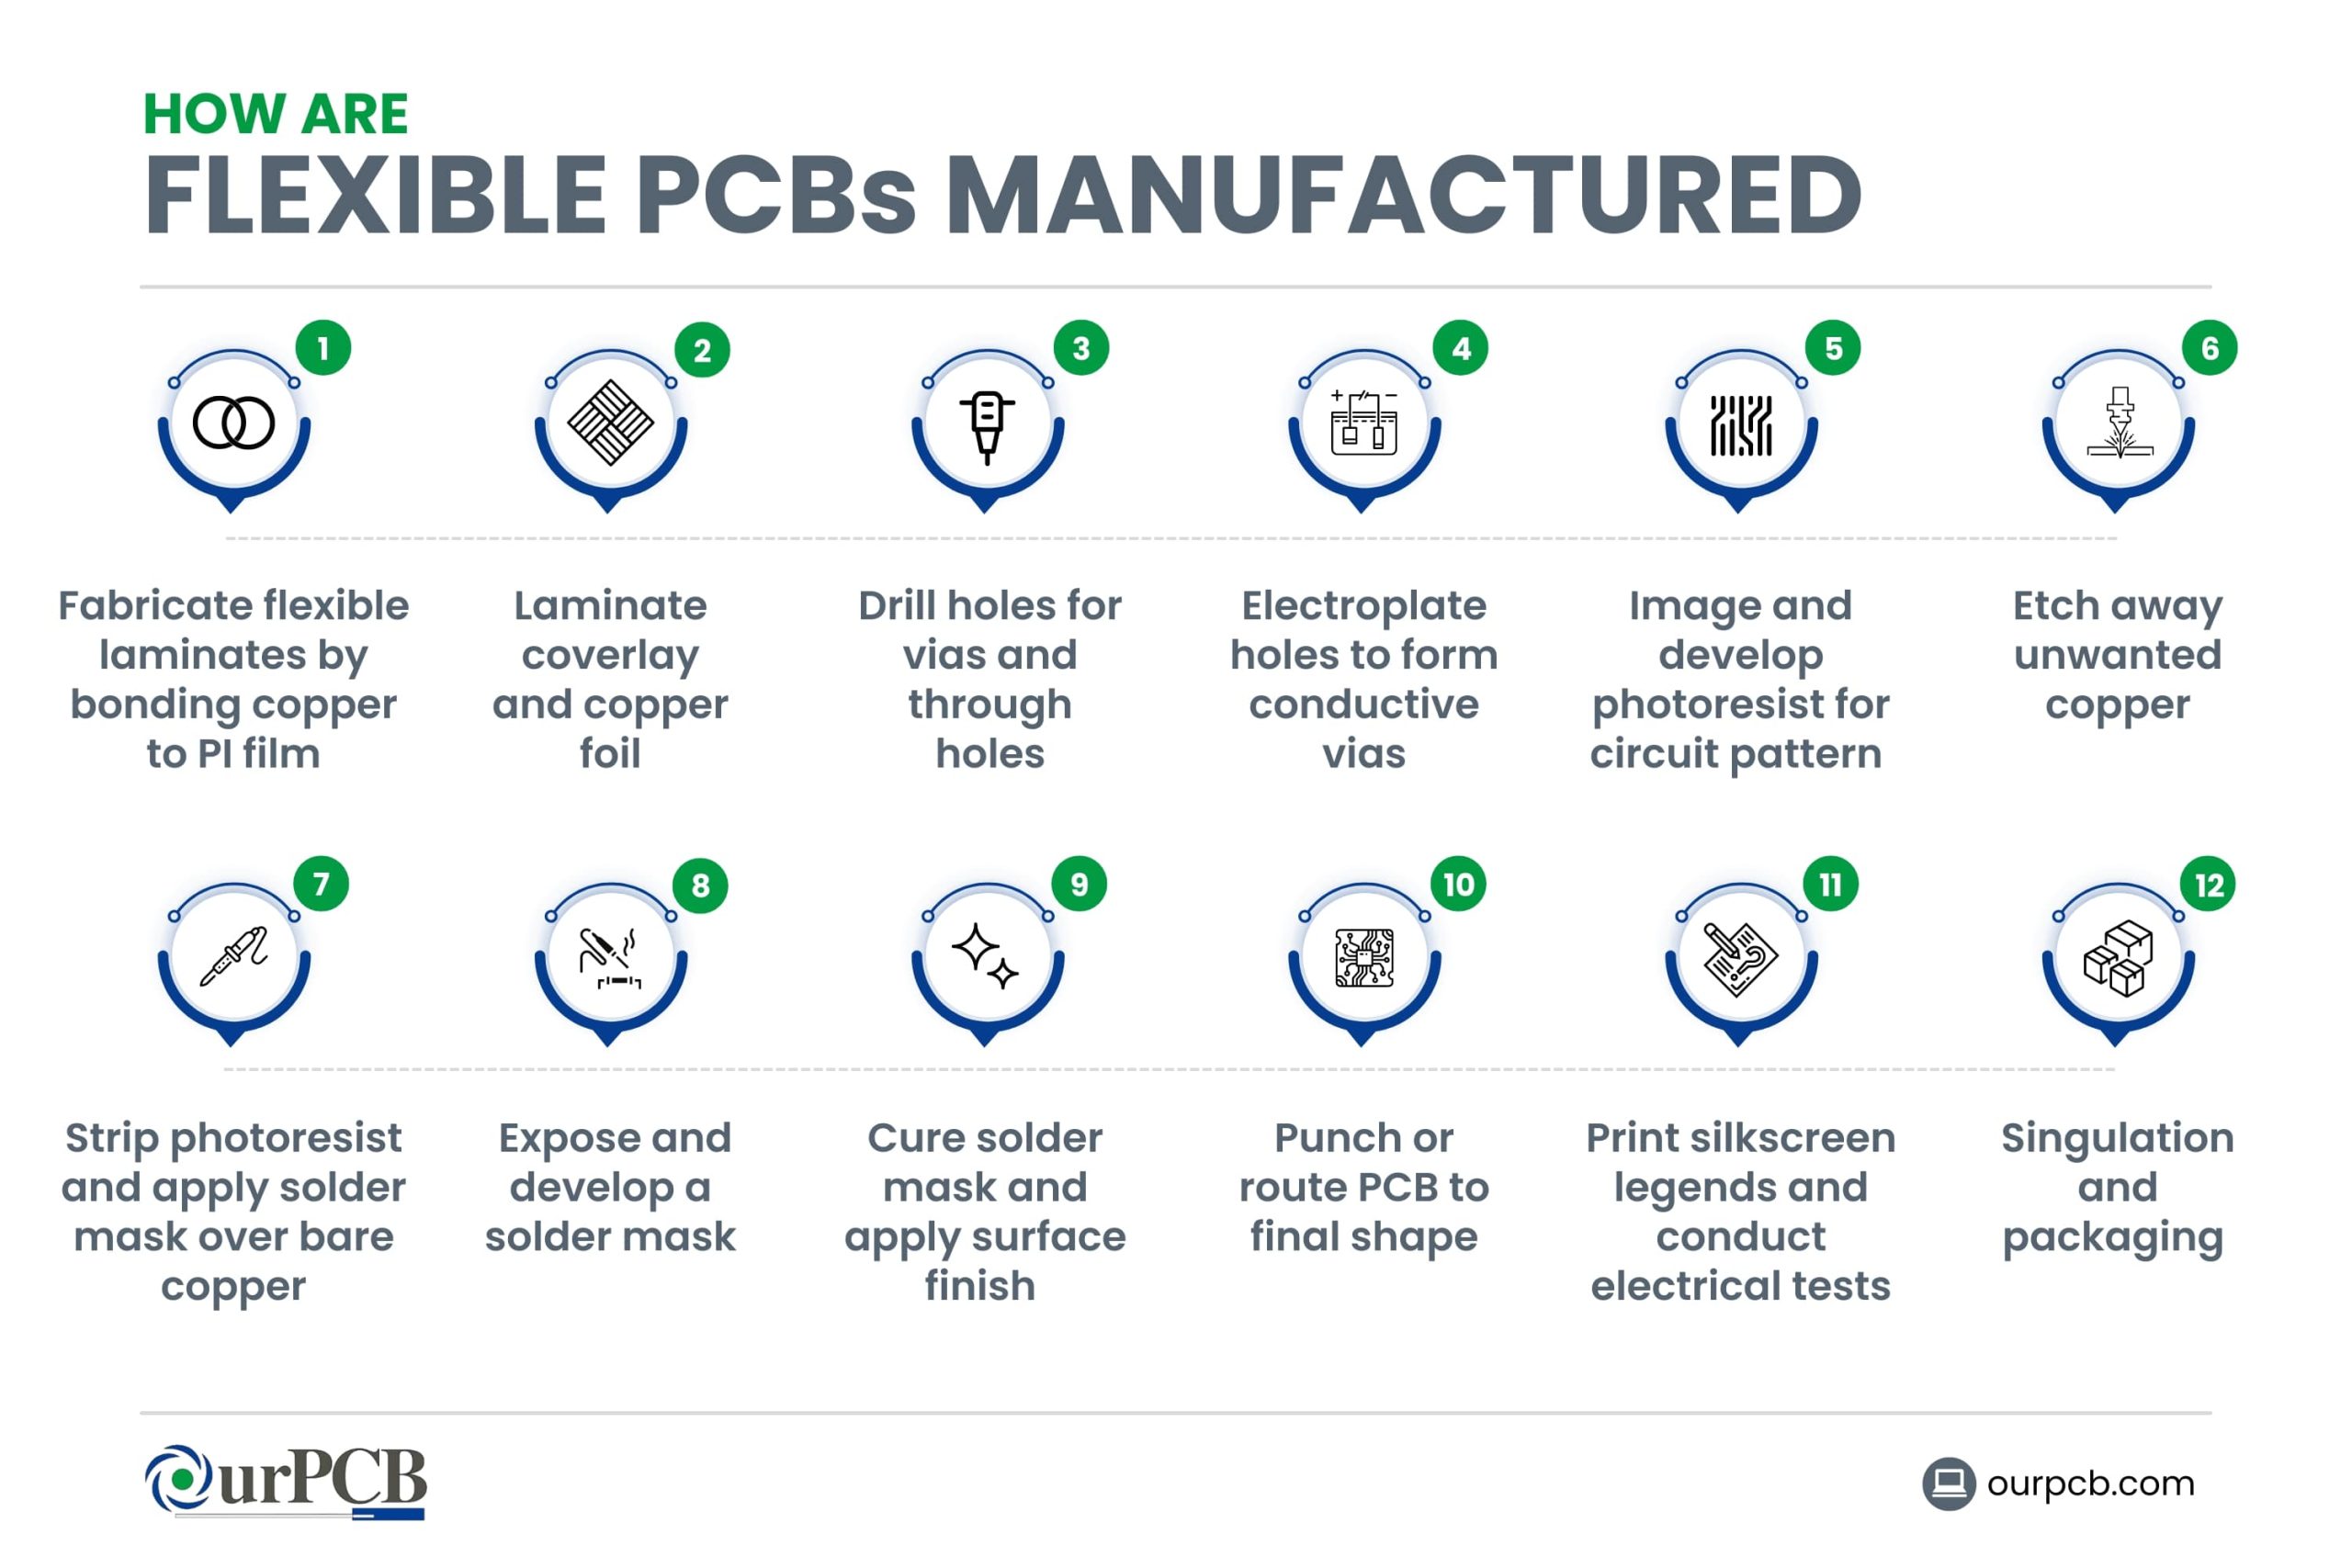 How are Flexible PCBs Manufactured